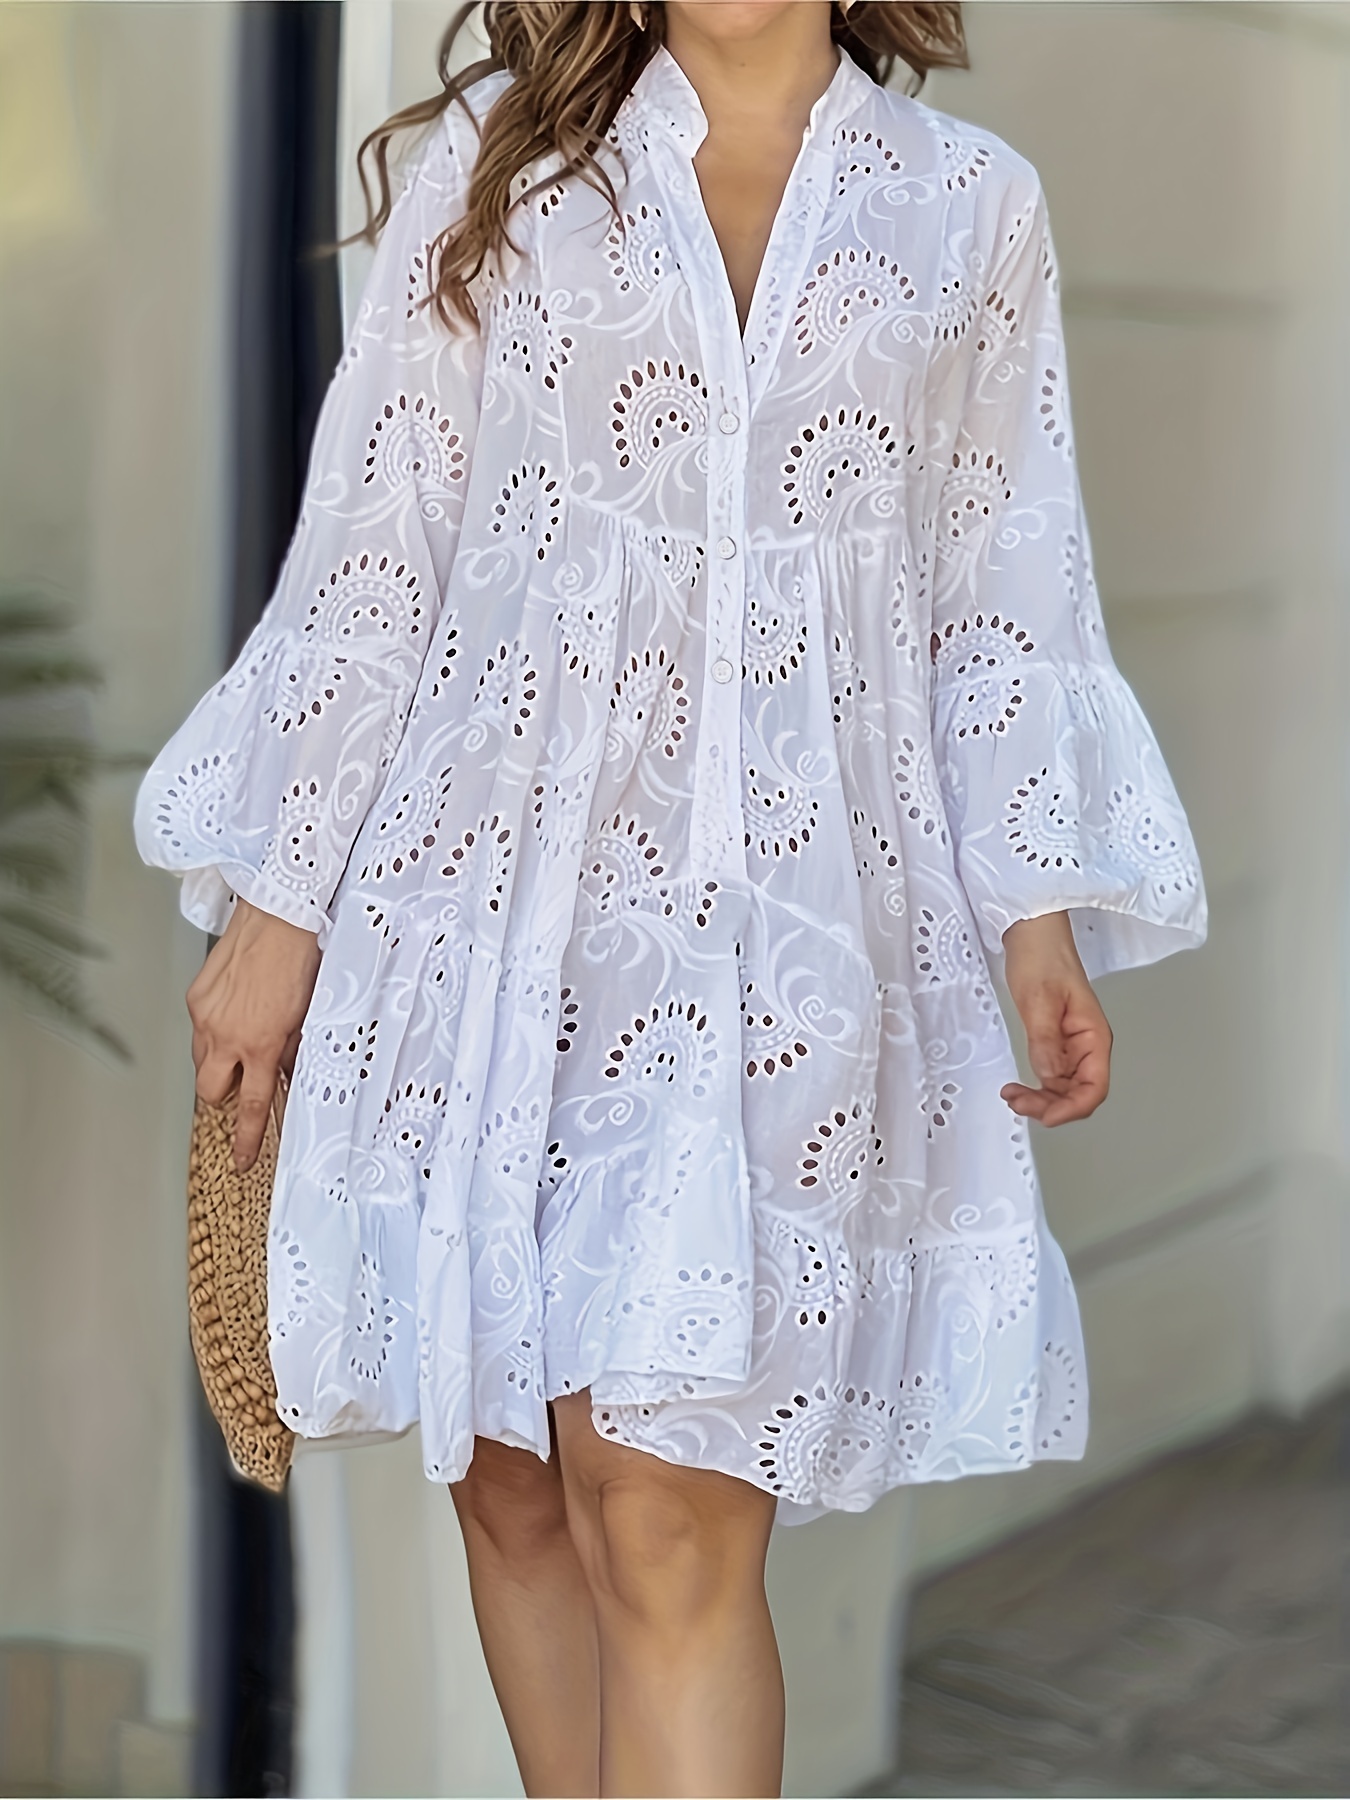 Women Lace-up Dresses Summer Ladies Skirt Elegant Casual Tie-Up Short Dress  Party Beach Household Work Female Type4 XL 